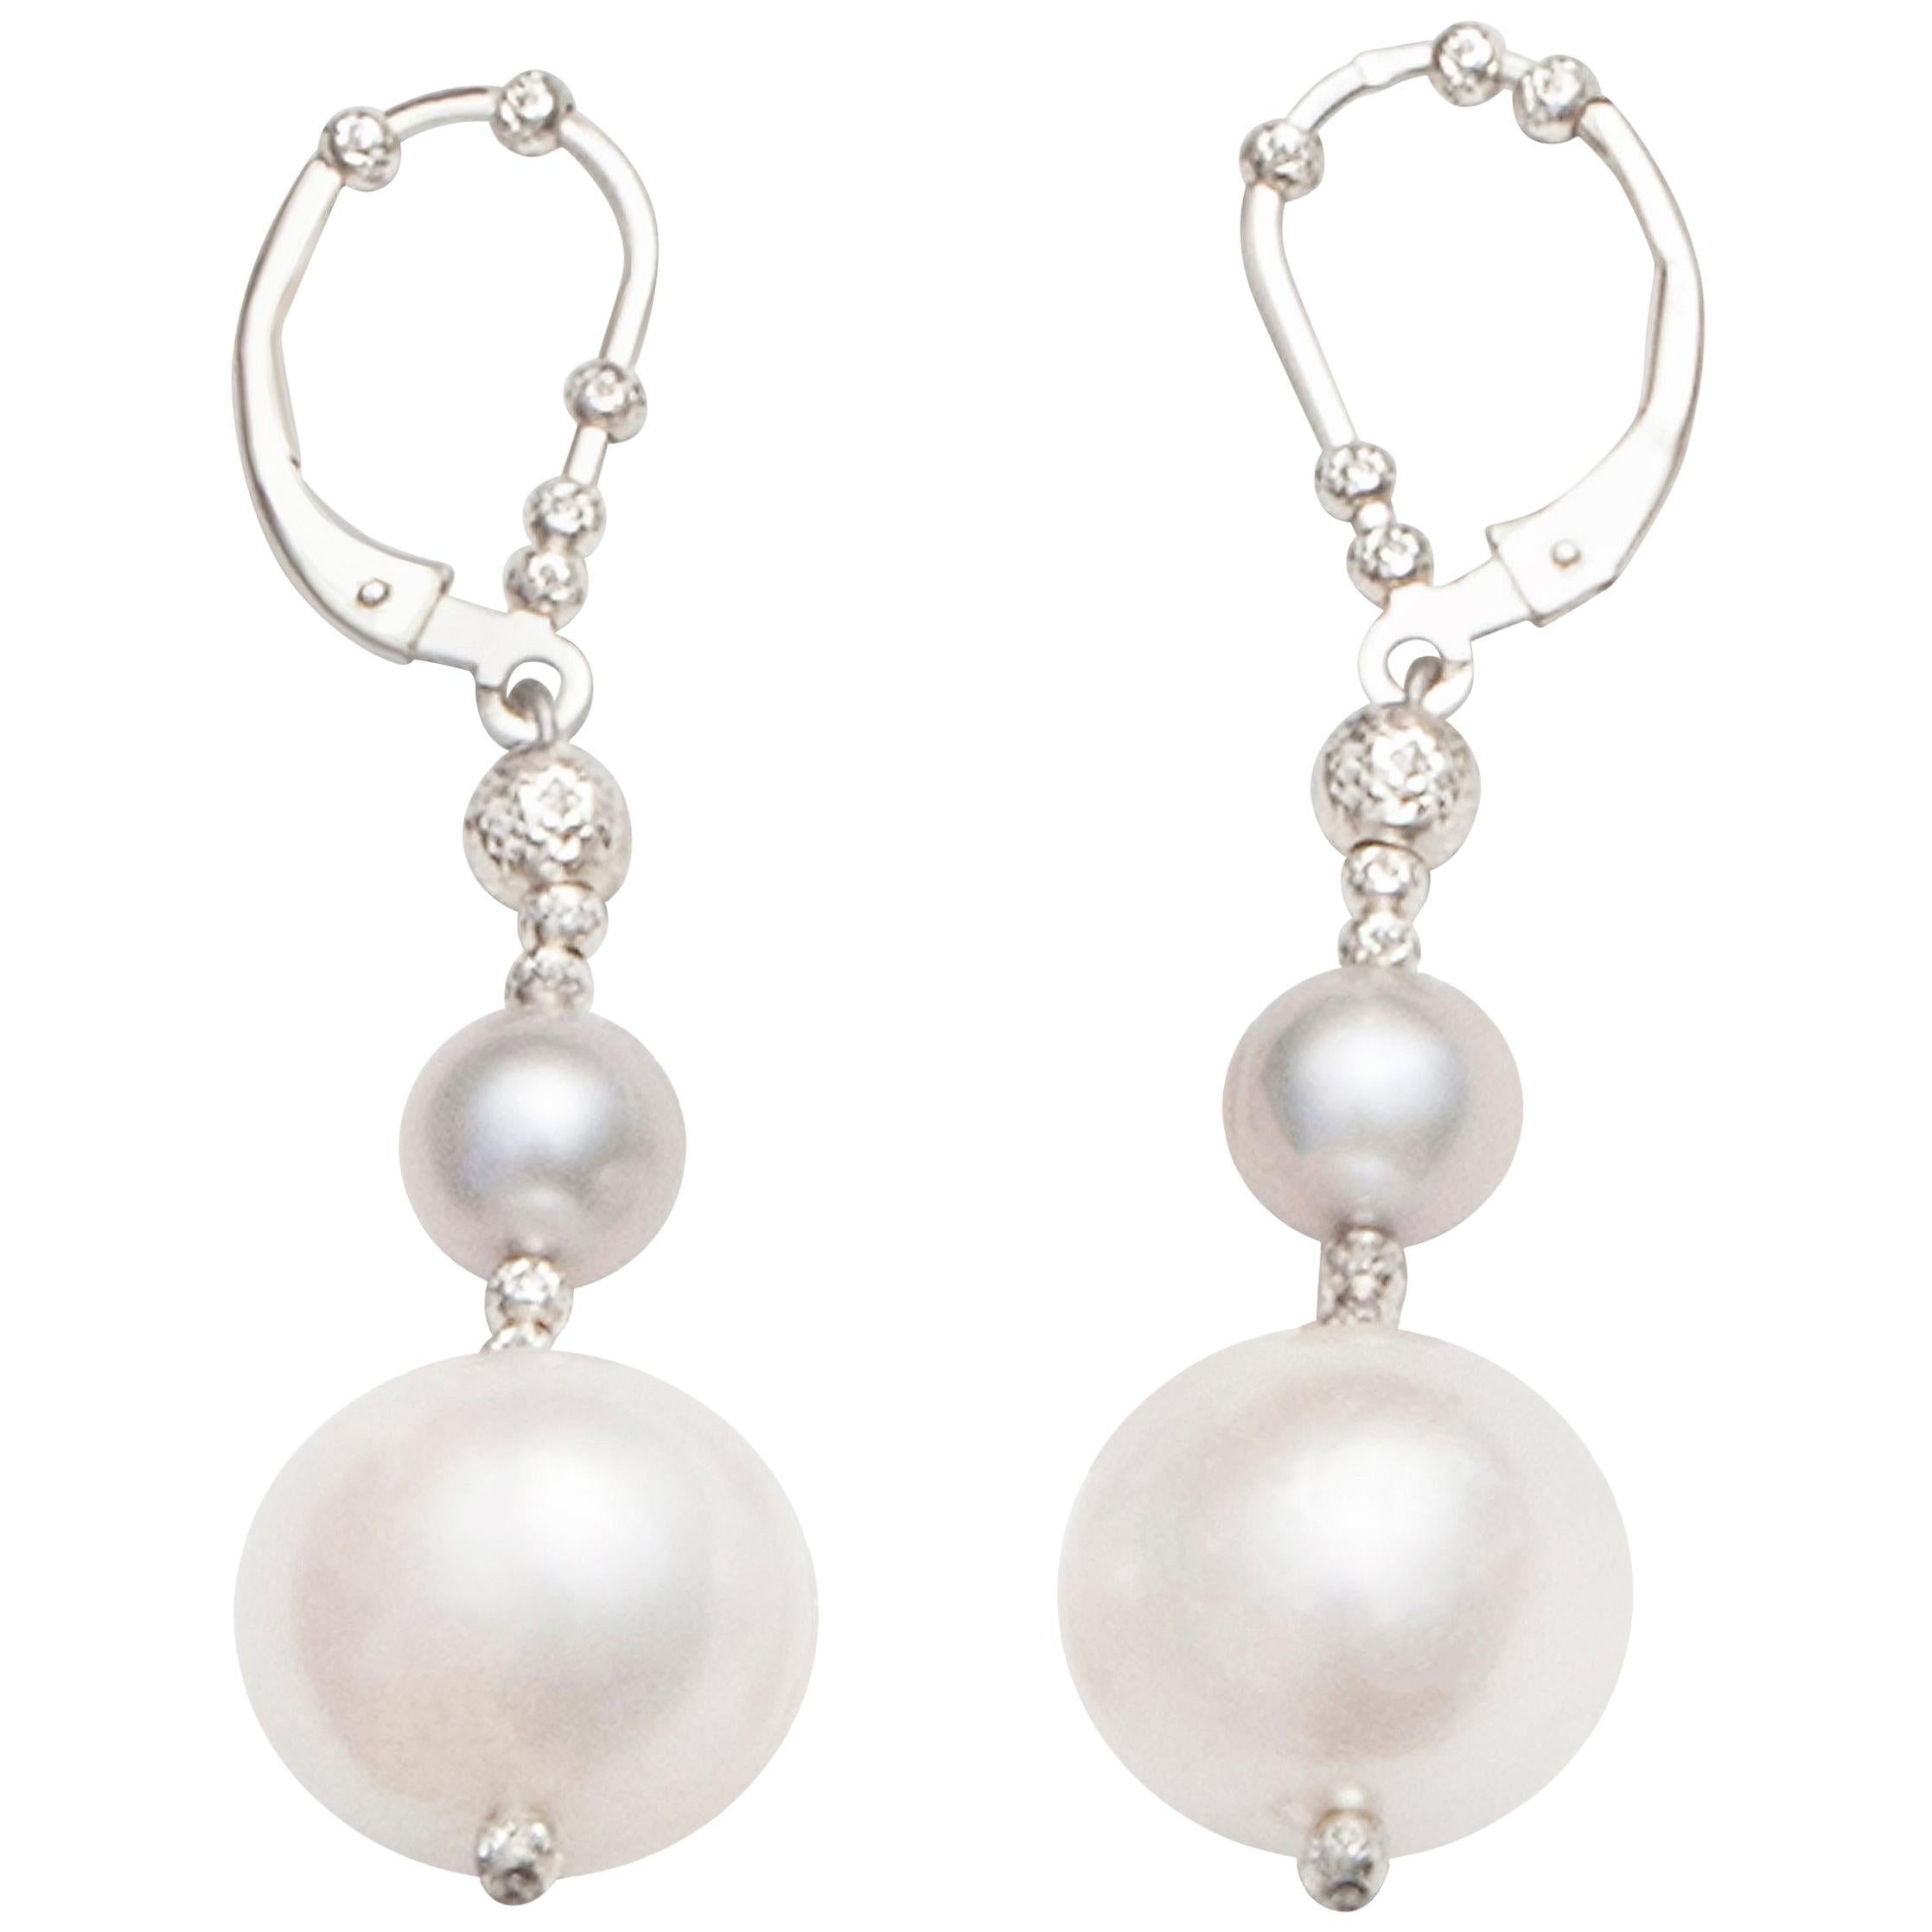 Grey and White Pearl Dangle Earrings with Sterling Silver Diamond Cut Beads For Sale